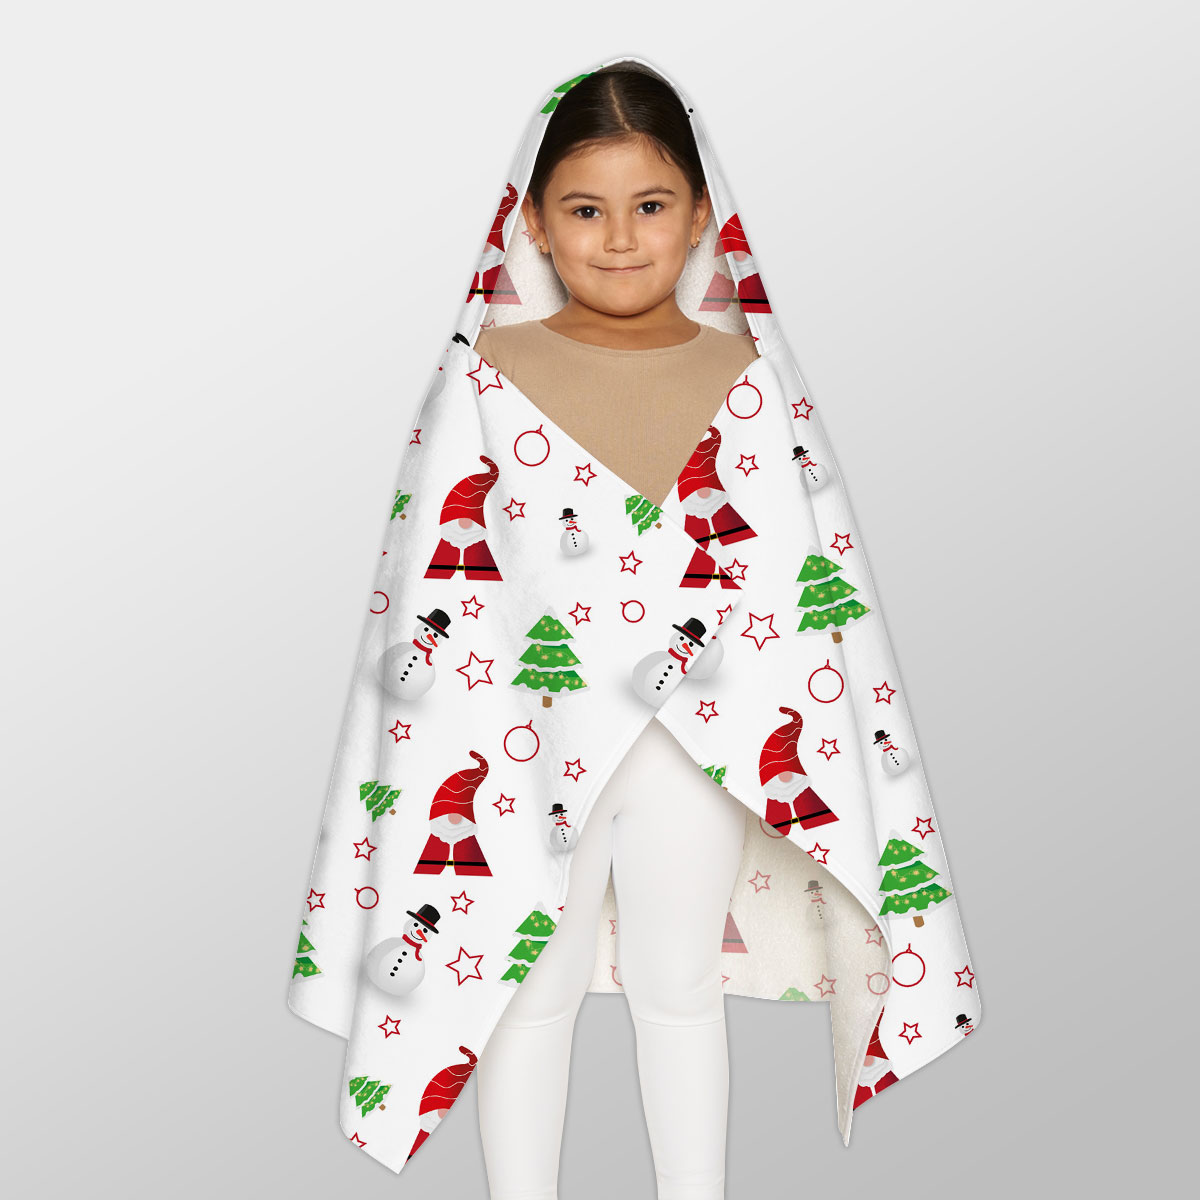 Santa Claus, Snowman Clipart And Pine Tree Silhouette Seamless Pattern Youth Hooded Towel